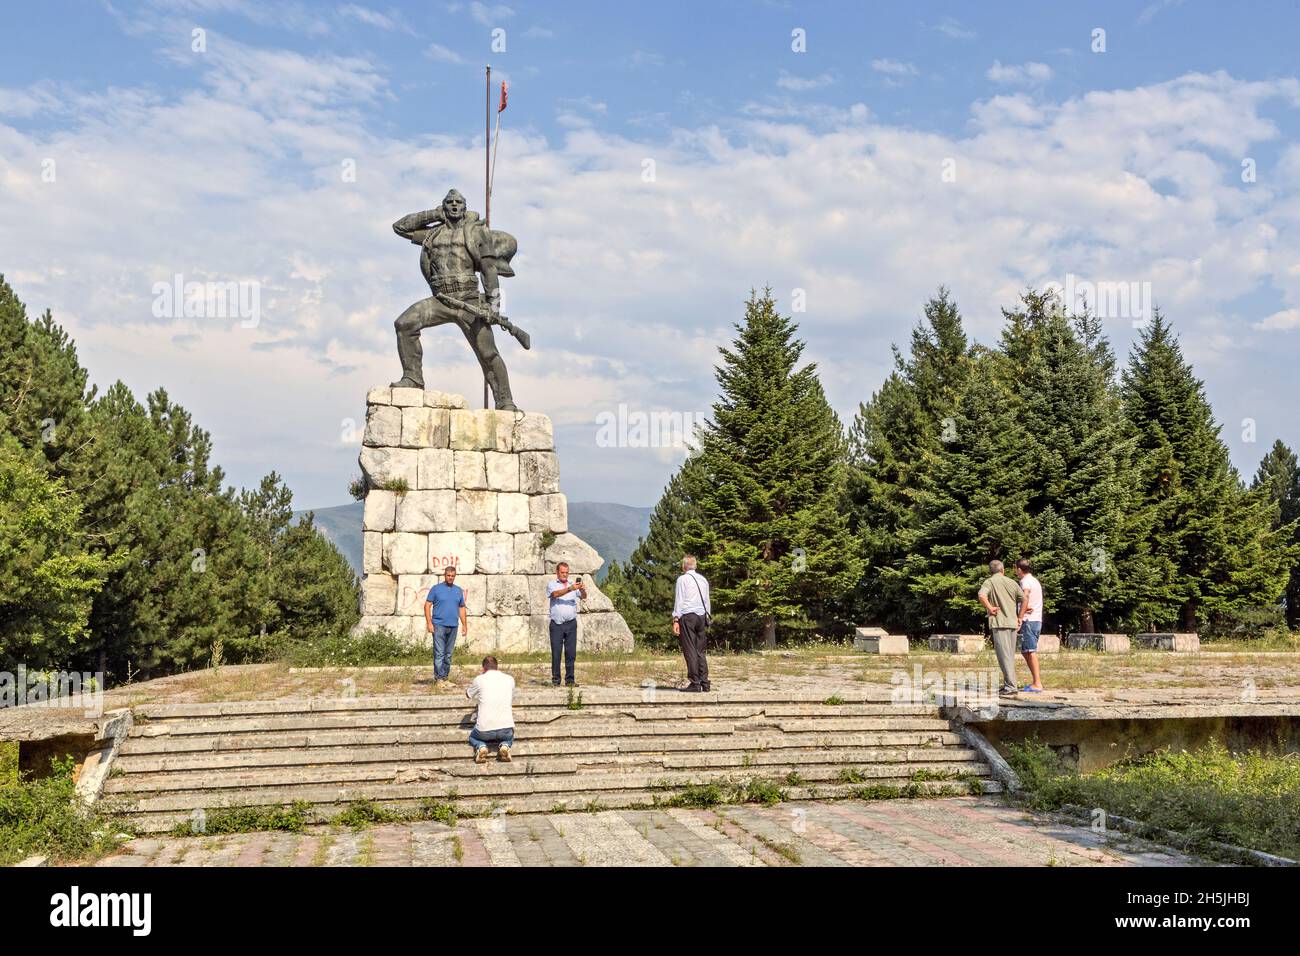 A monument in Bajram Curri built by the communists to commemerate the sacrife of partisan fighters during WW2. Stock Photo